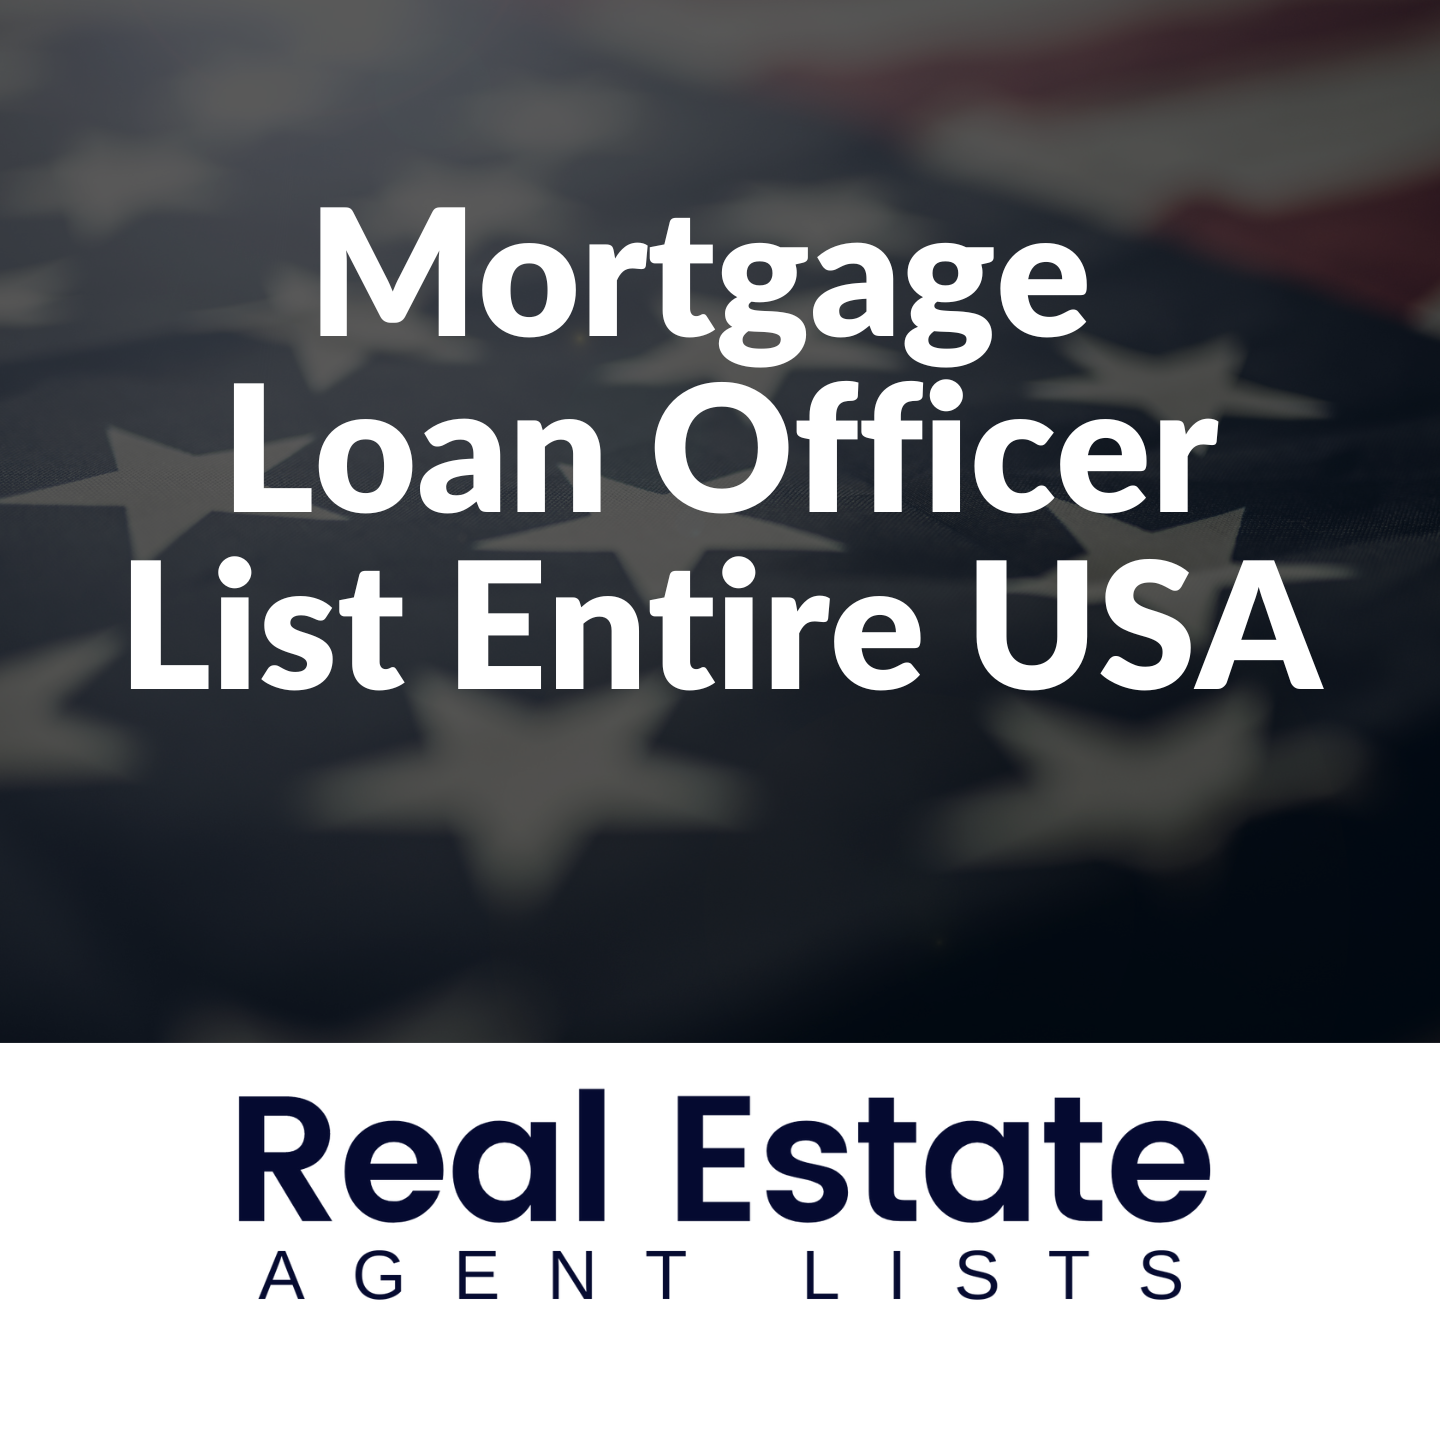 Entire Database of USA Mortgage Loan Officers